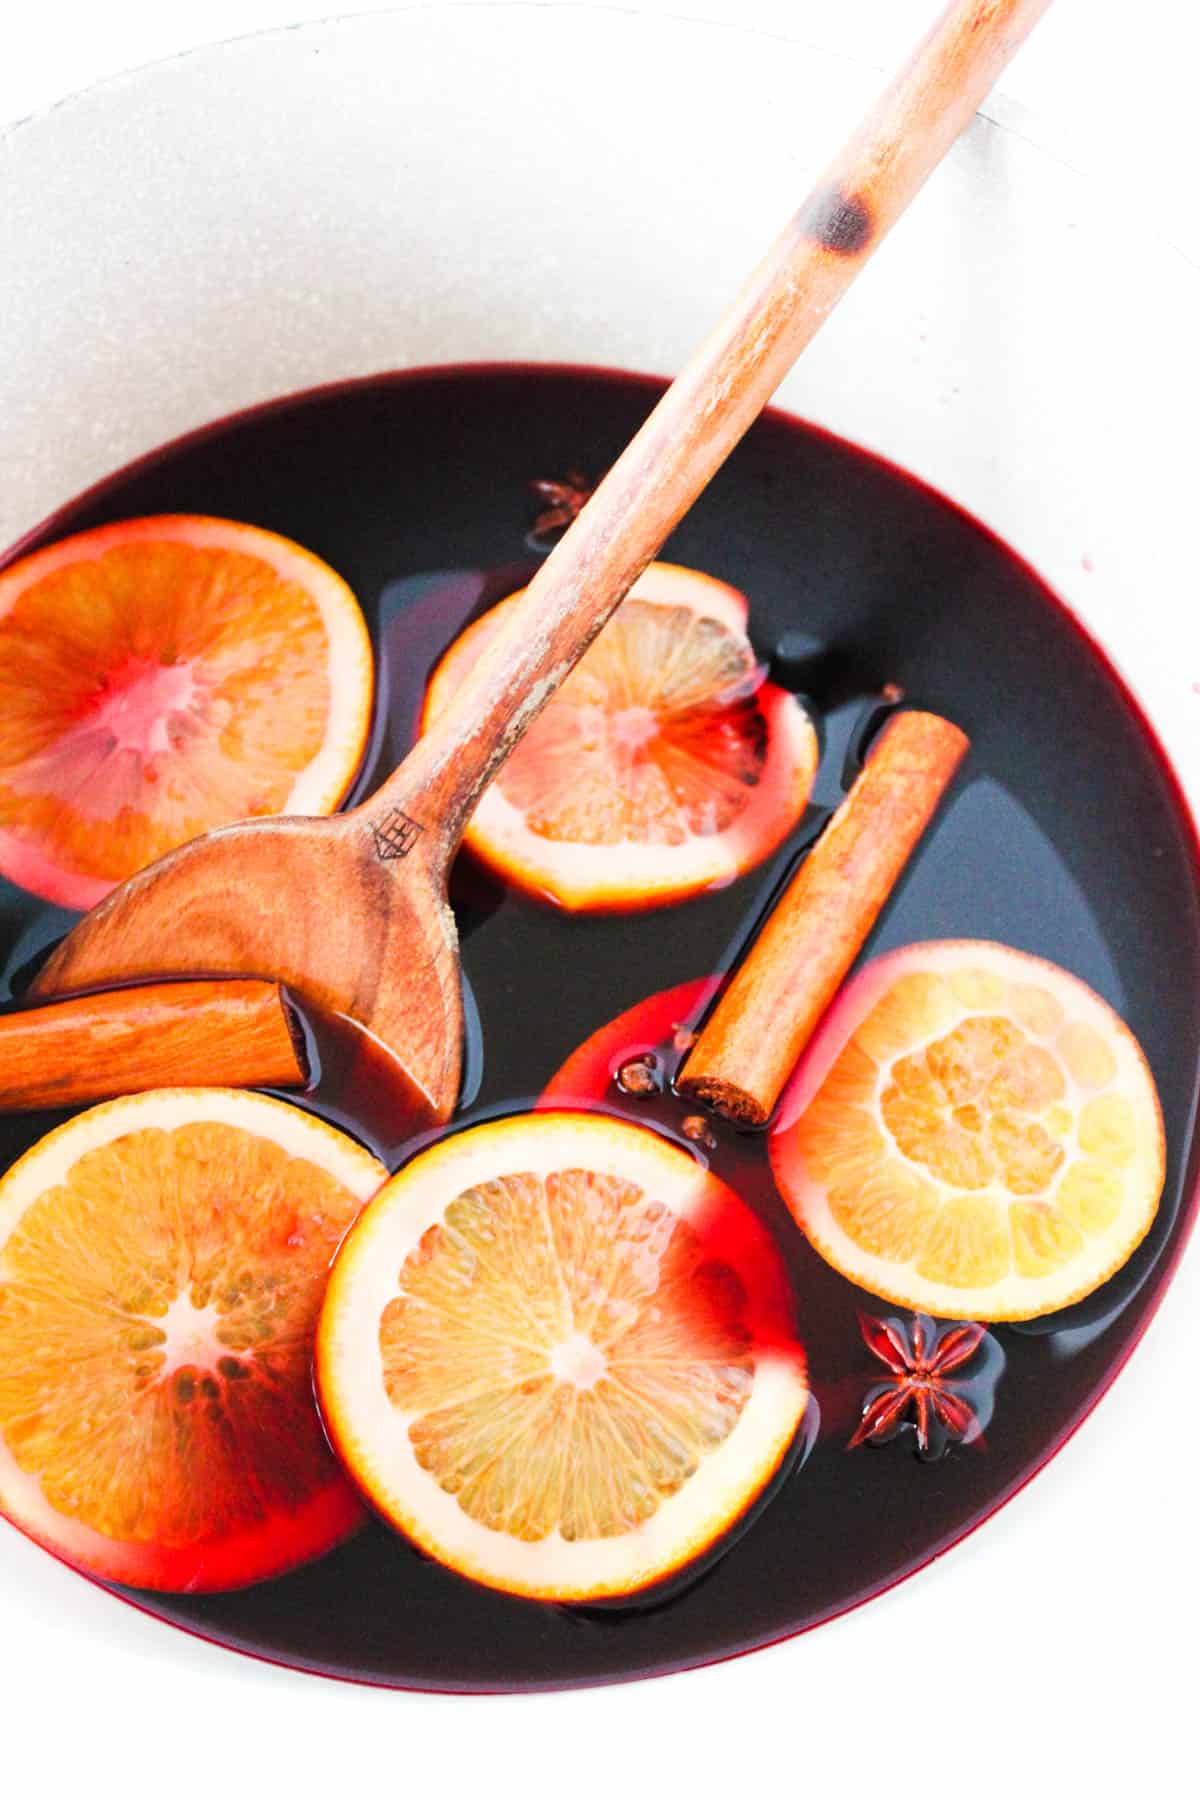 Wooden spoon stirring a pot of mulled wine.